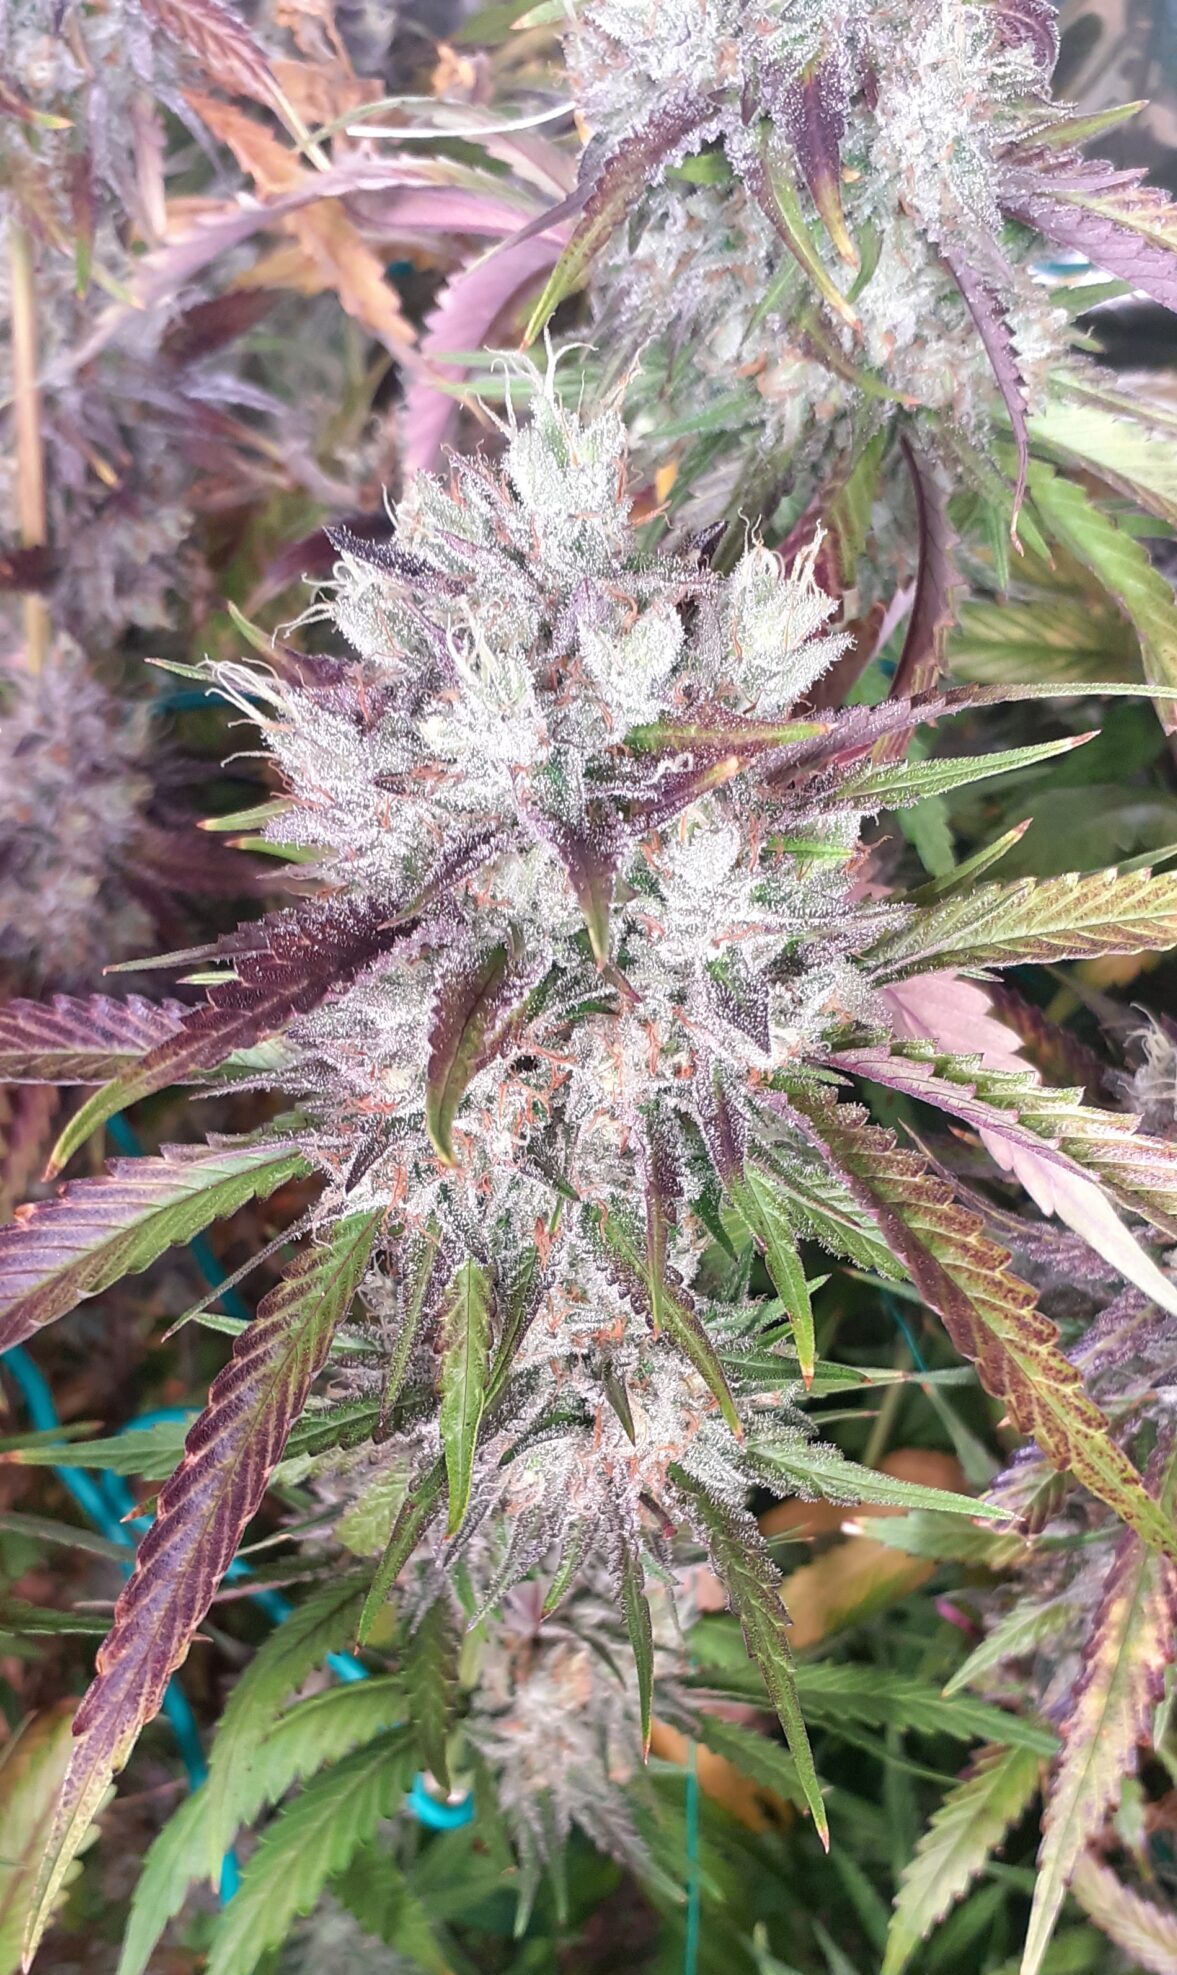 White Widow from GreenHouse Seeds